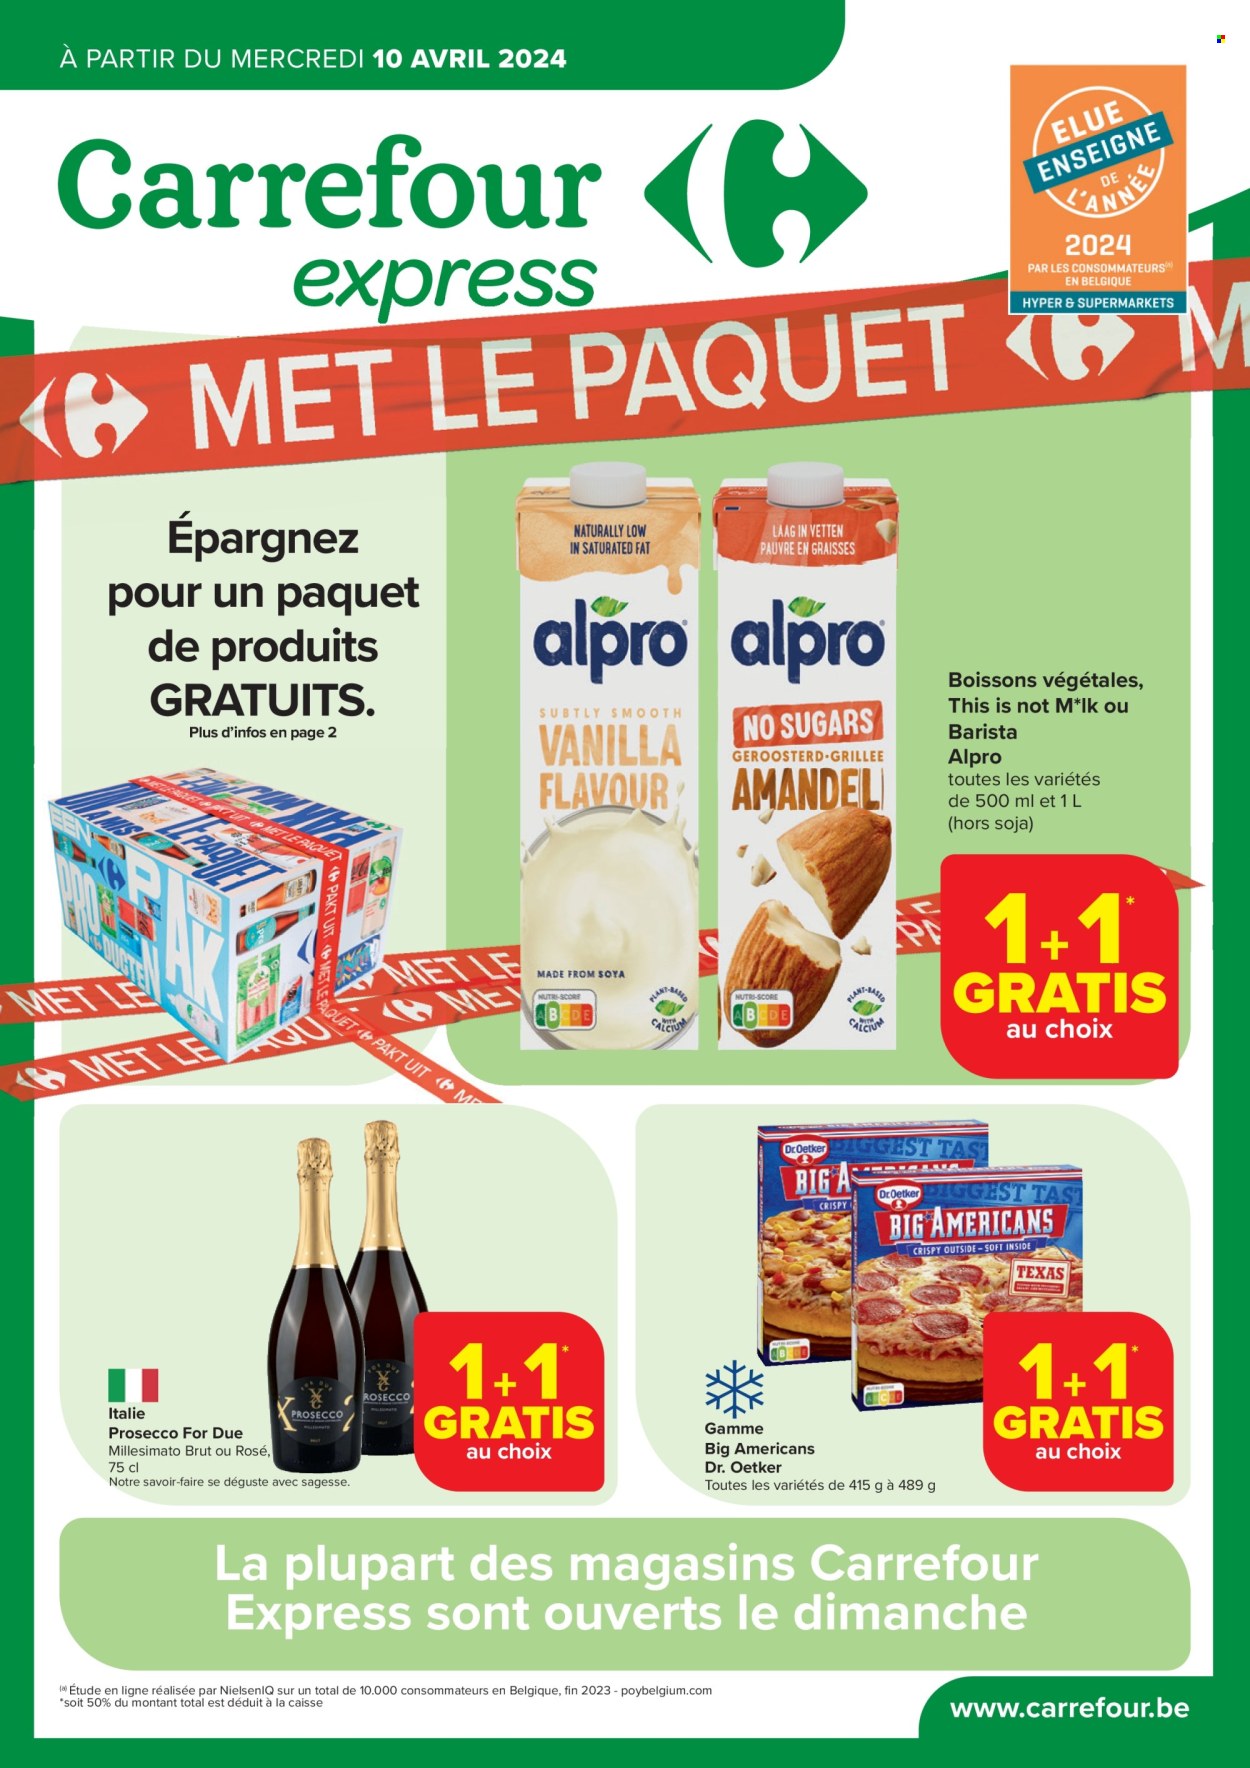 Catalogue Carrefour express - 10.4.2024 - 16.4.2024. Page 1.